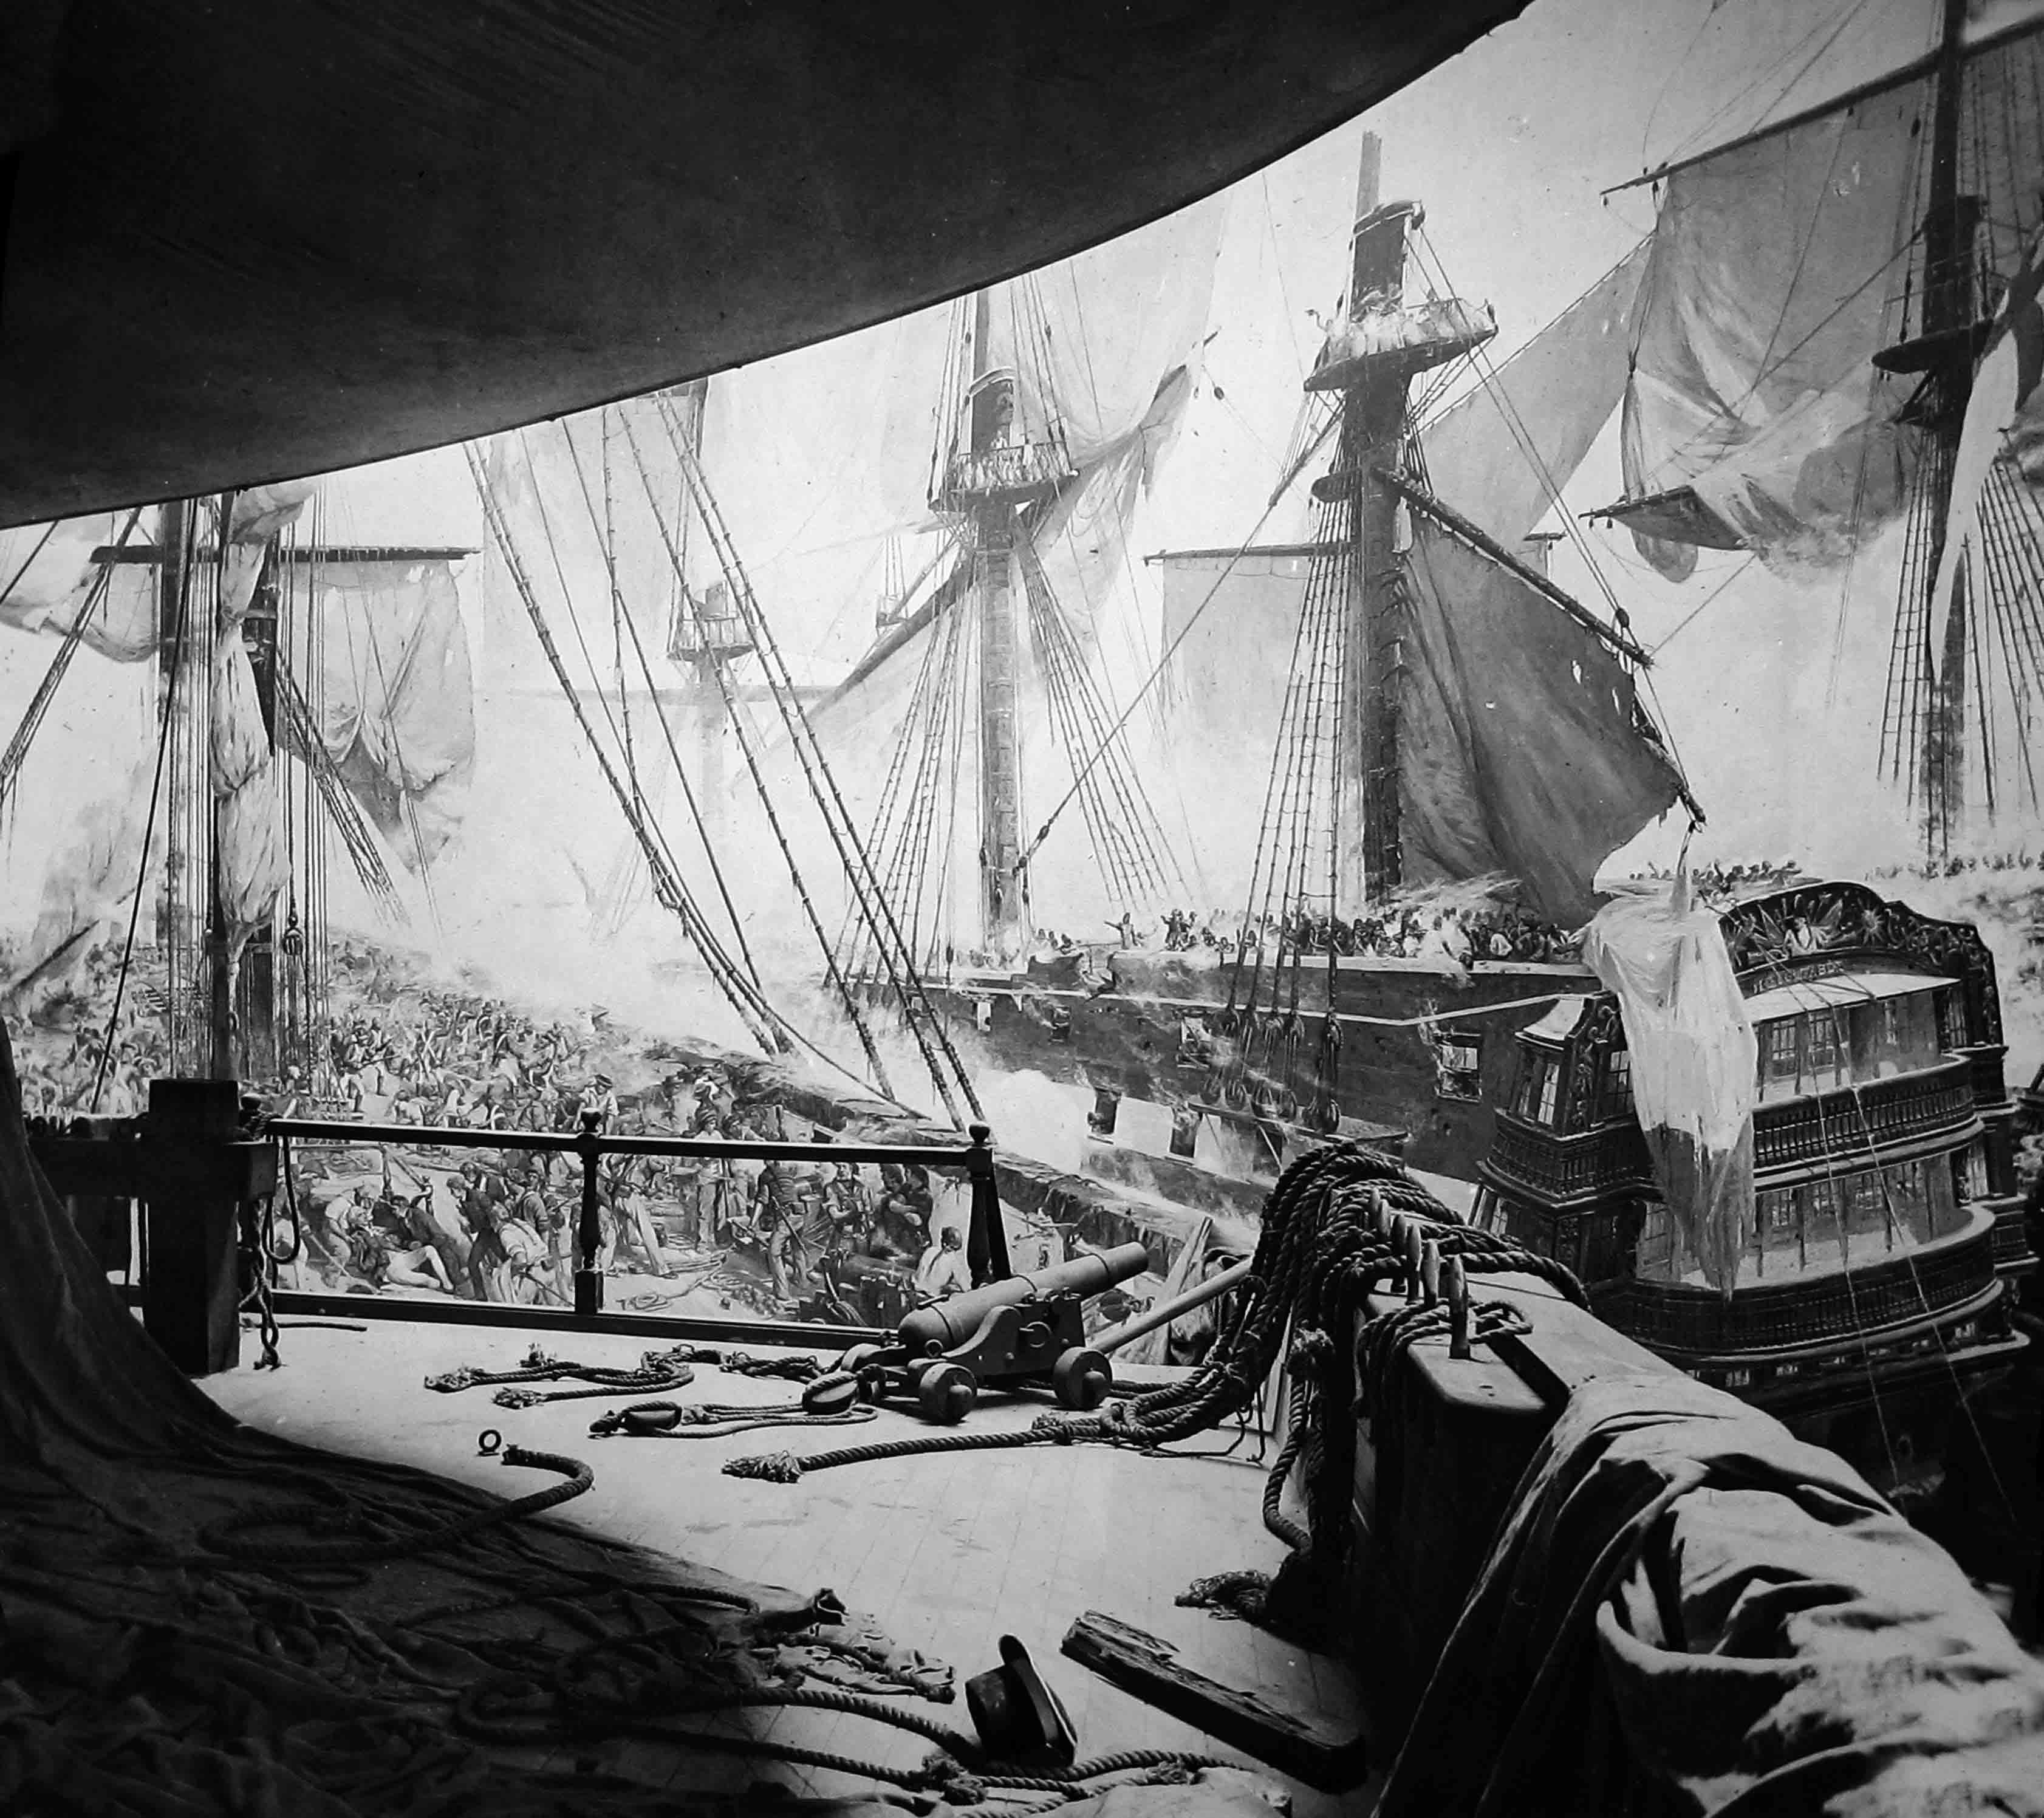 A panorama display of the Battle of Trafalgar with canons and ropes in the foreground.